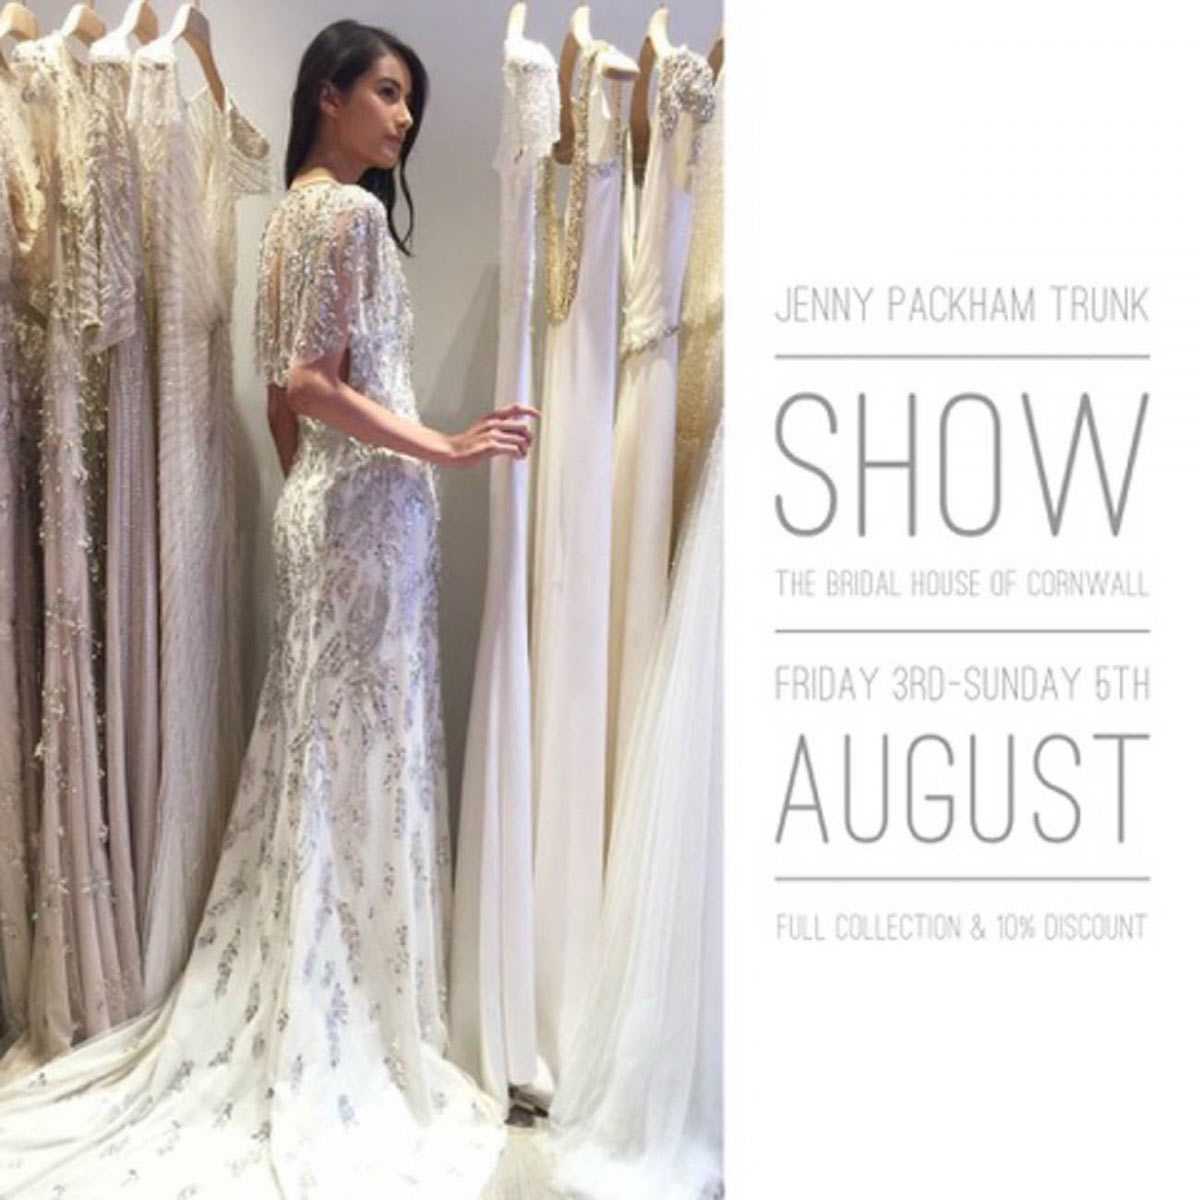 Jenny Packham Trunk Show at The Bridal House of Cornwall